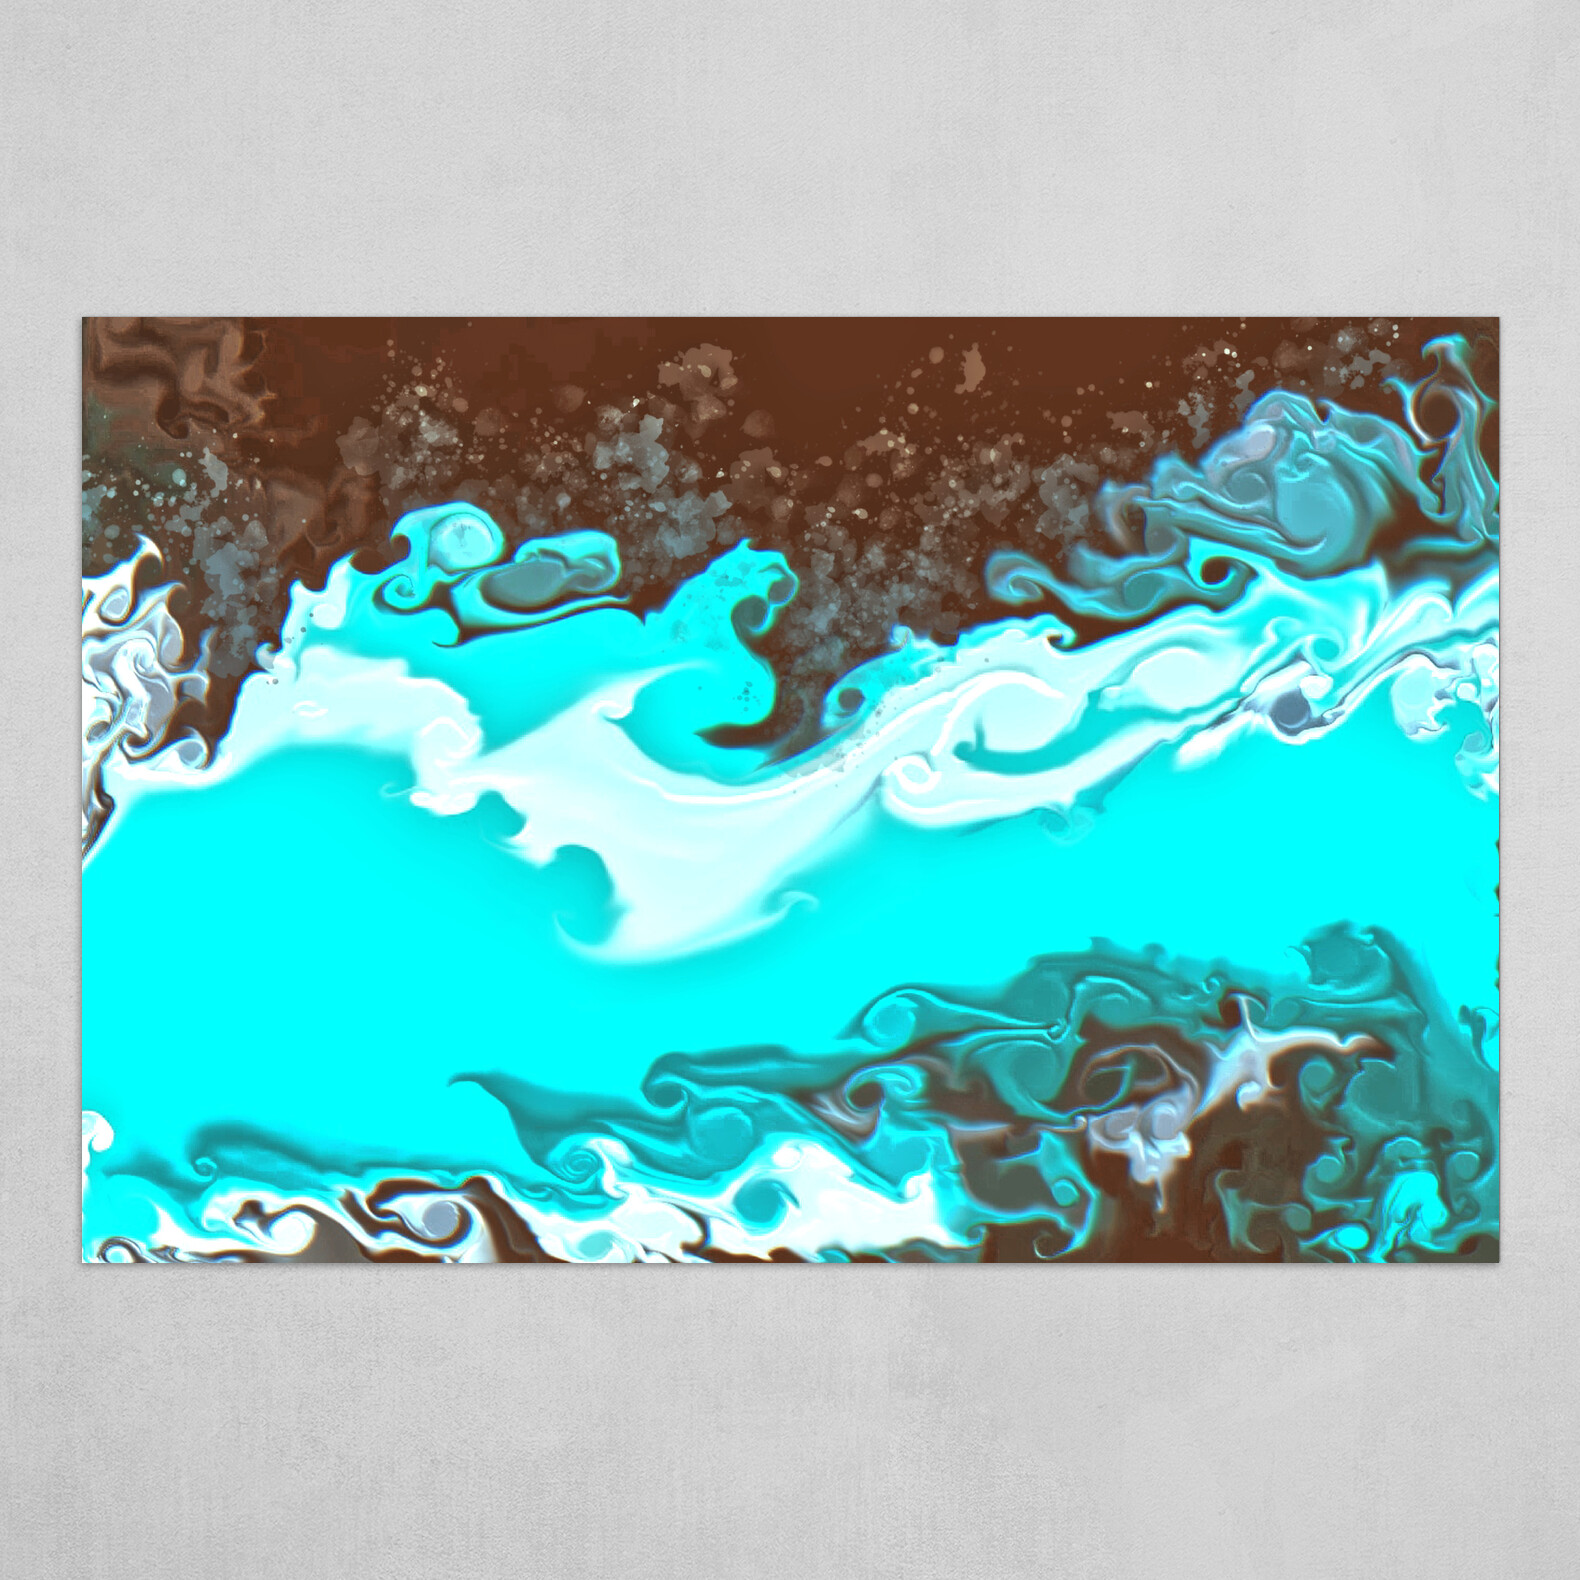 Blue White and Brown fluid pour abstract 4